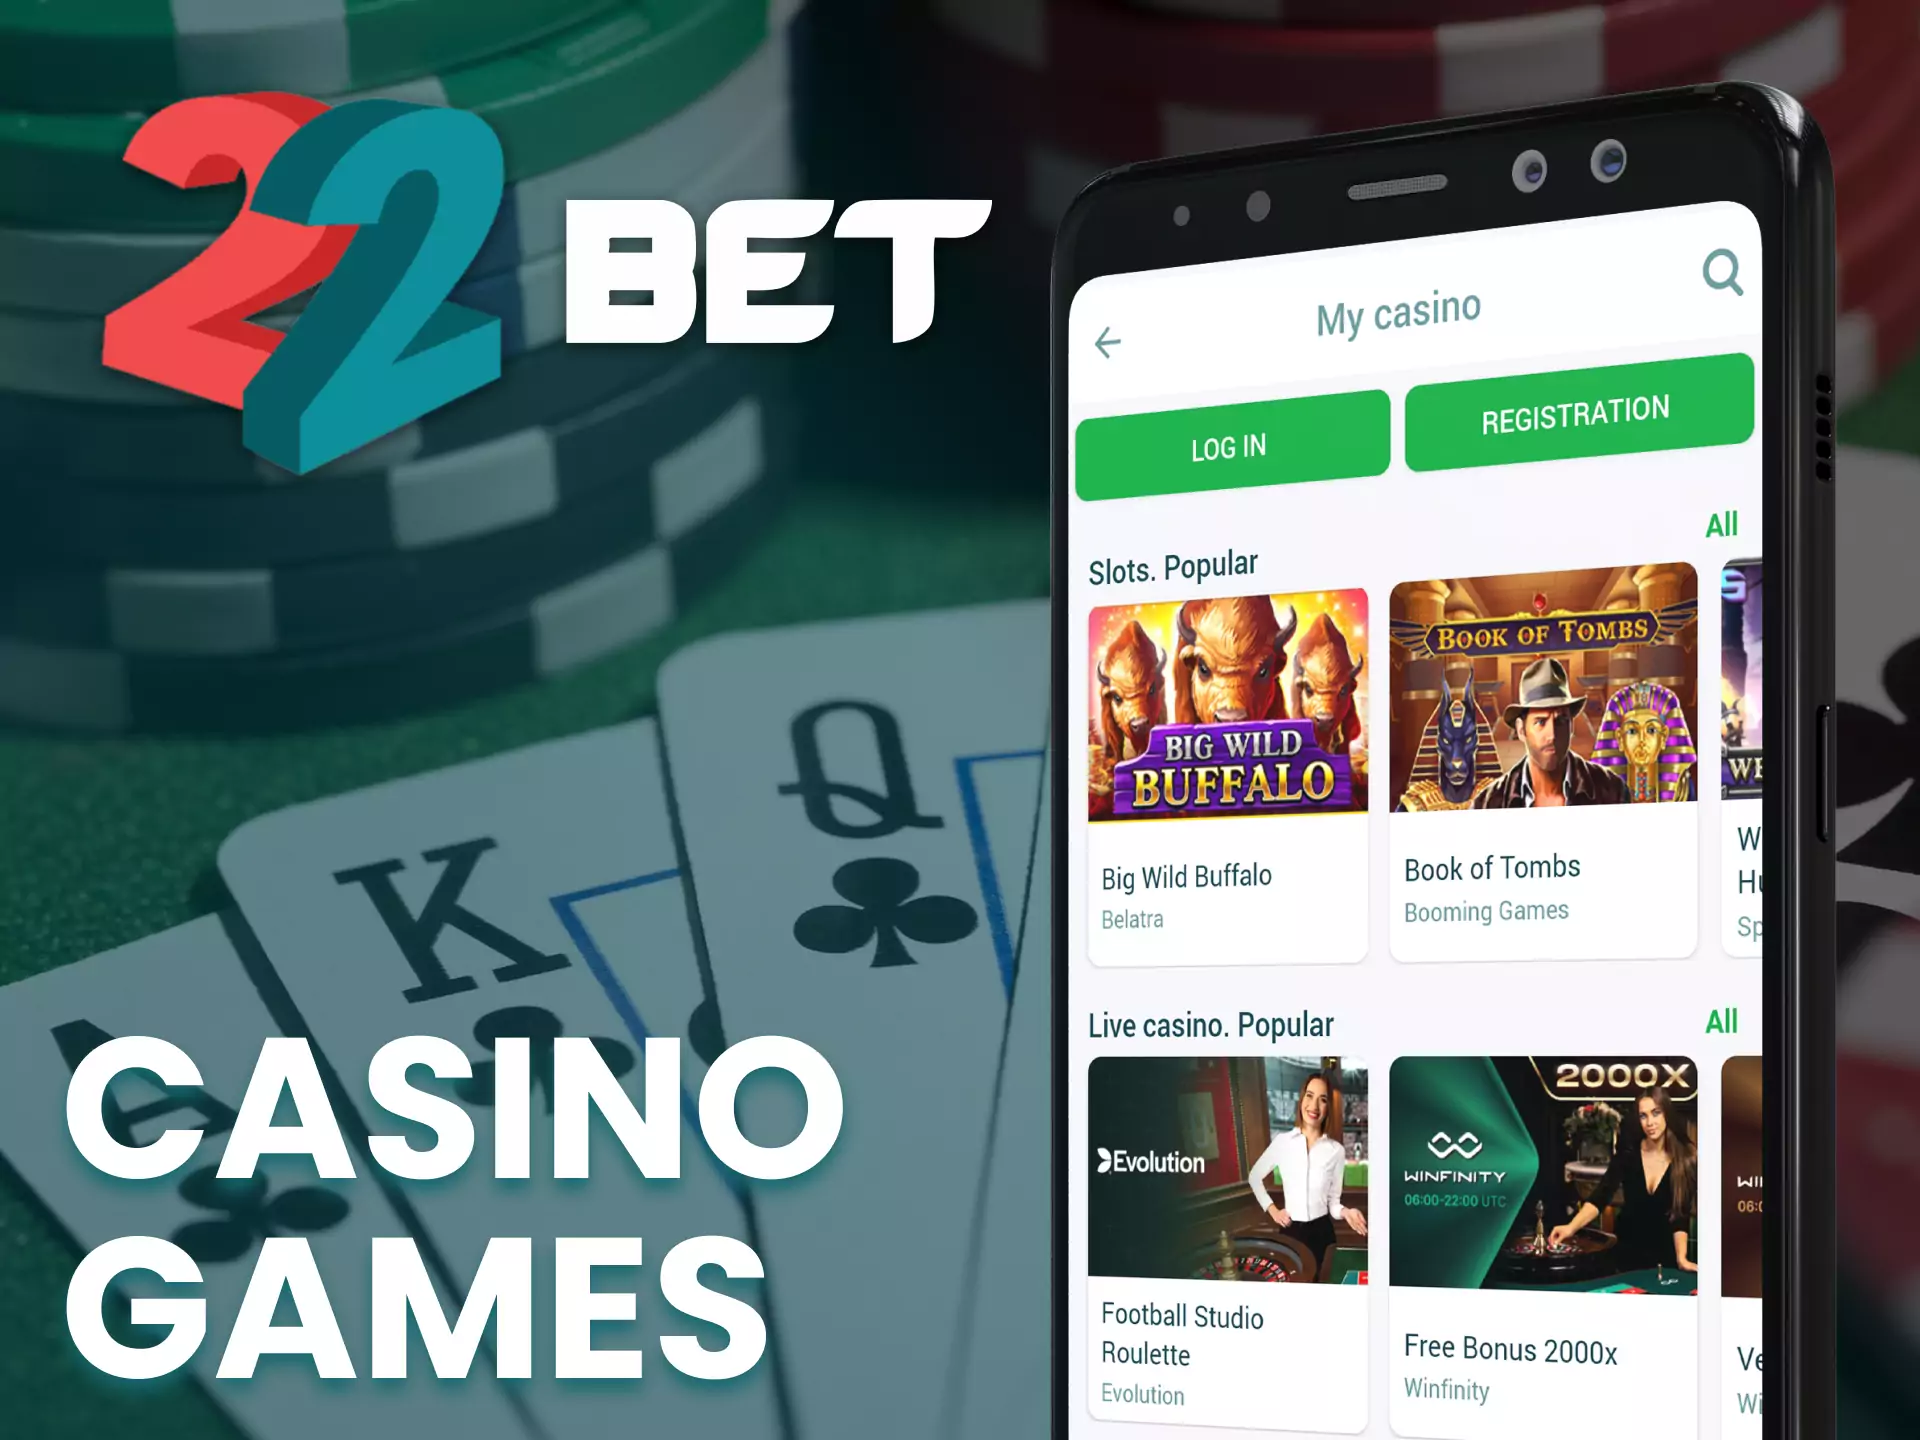 In the casino section, play different games in the 22bet app.